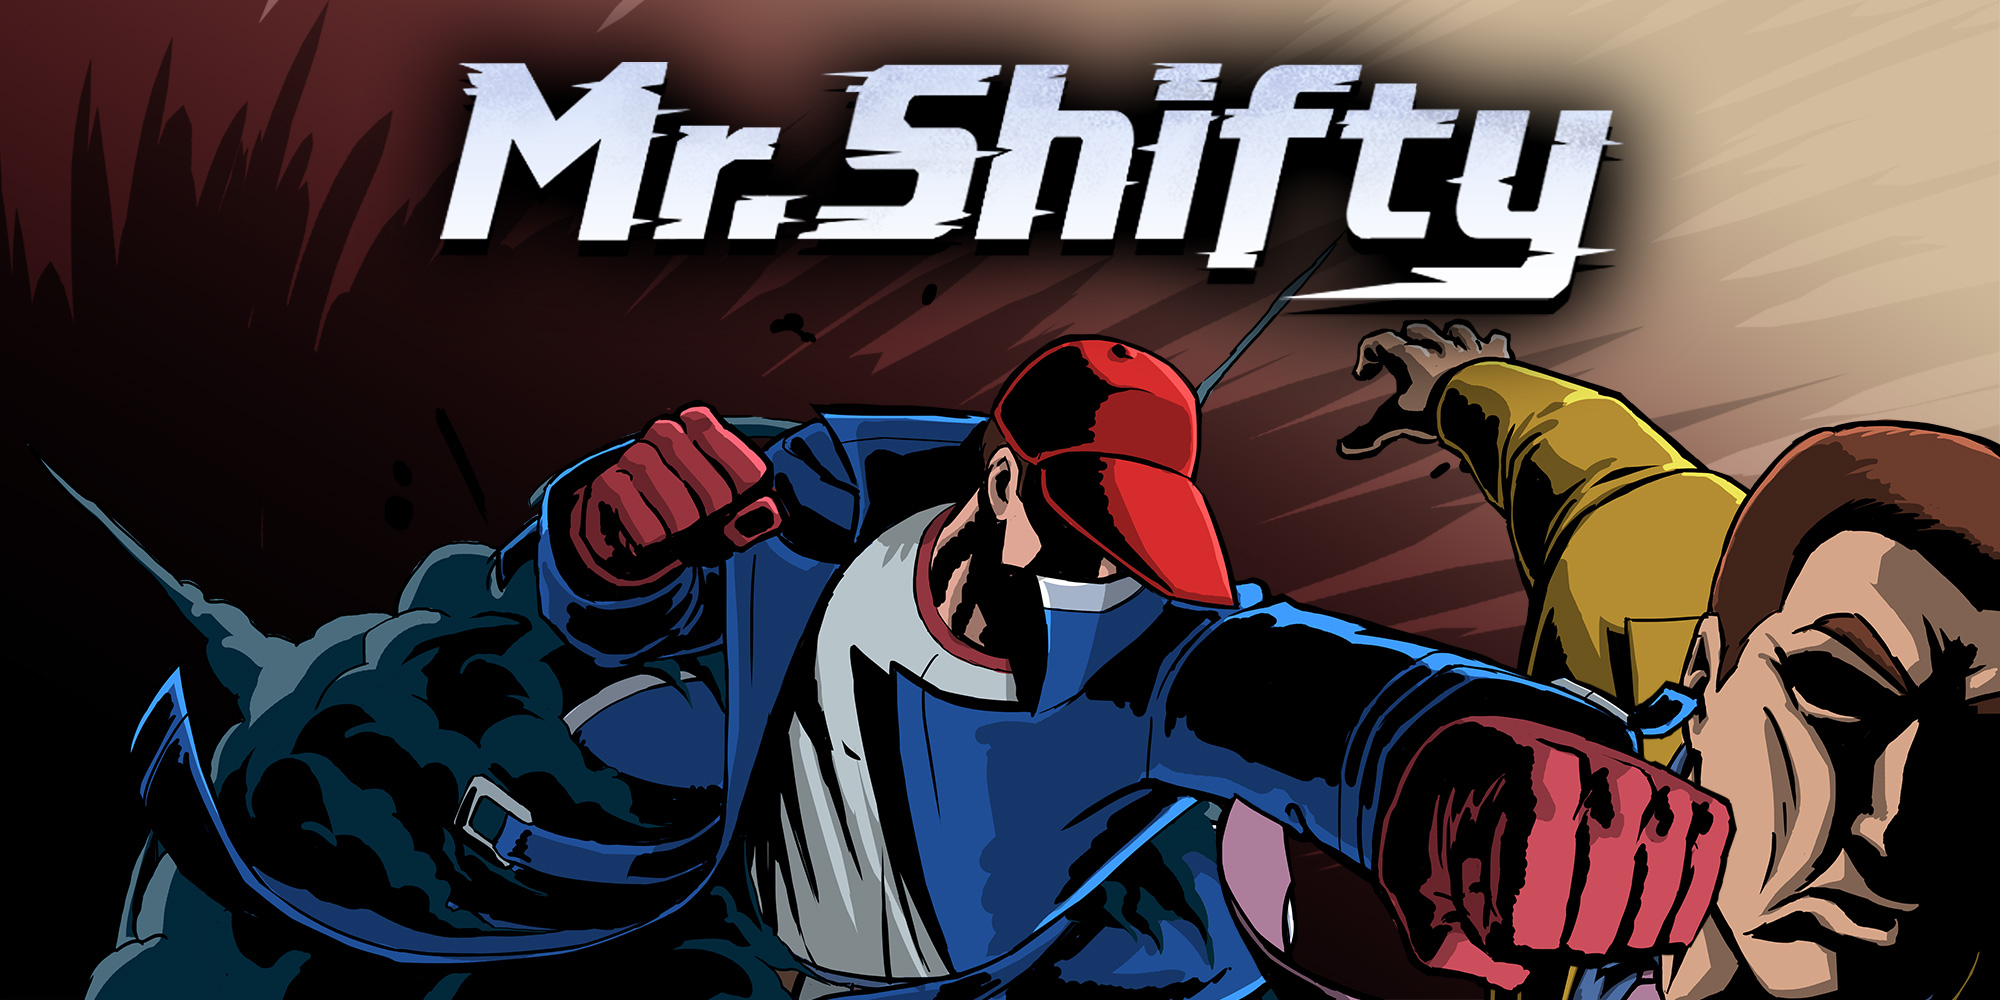 purchase mr shifty